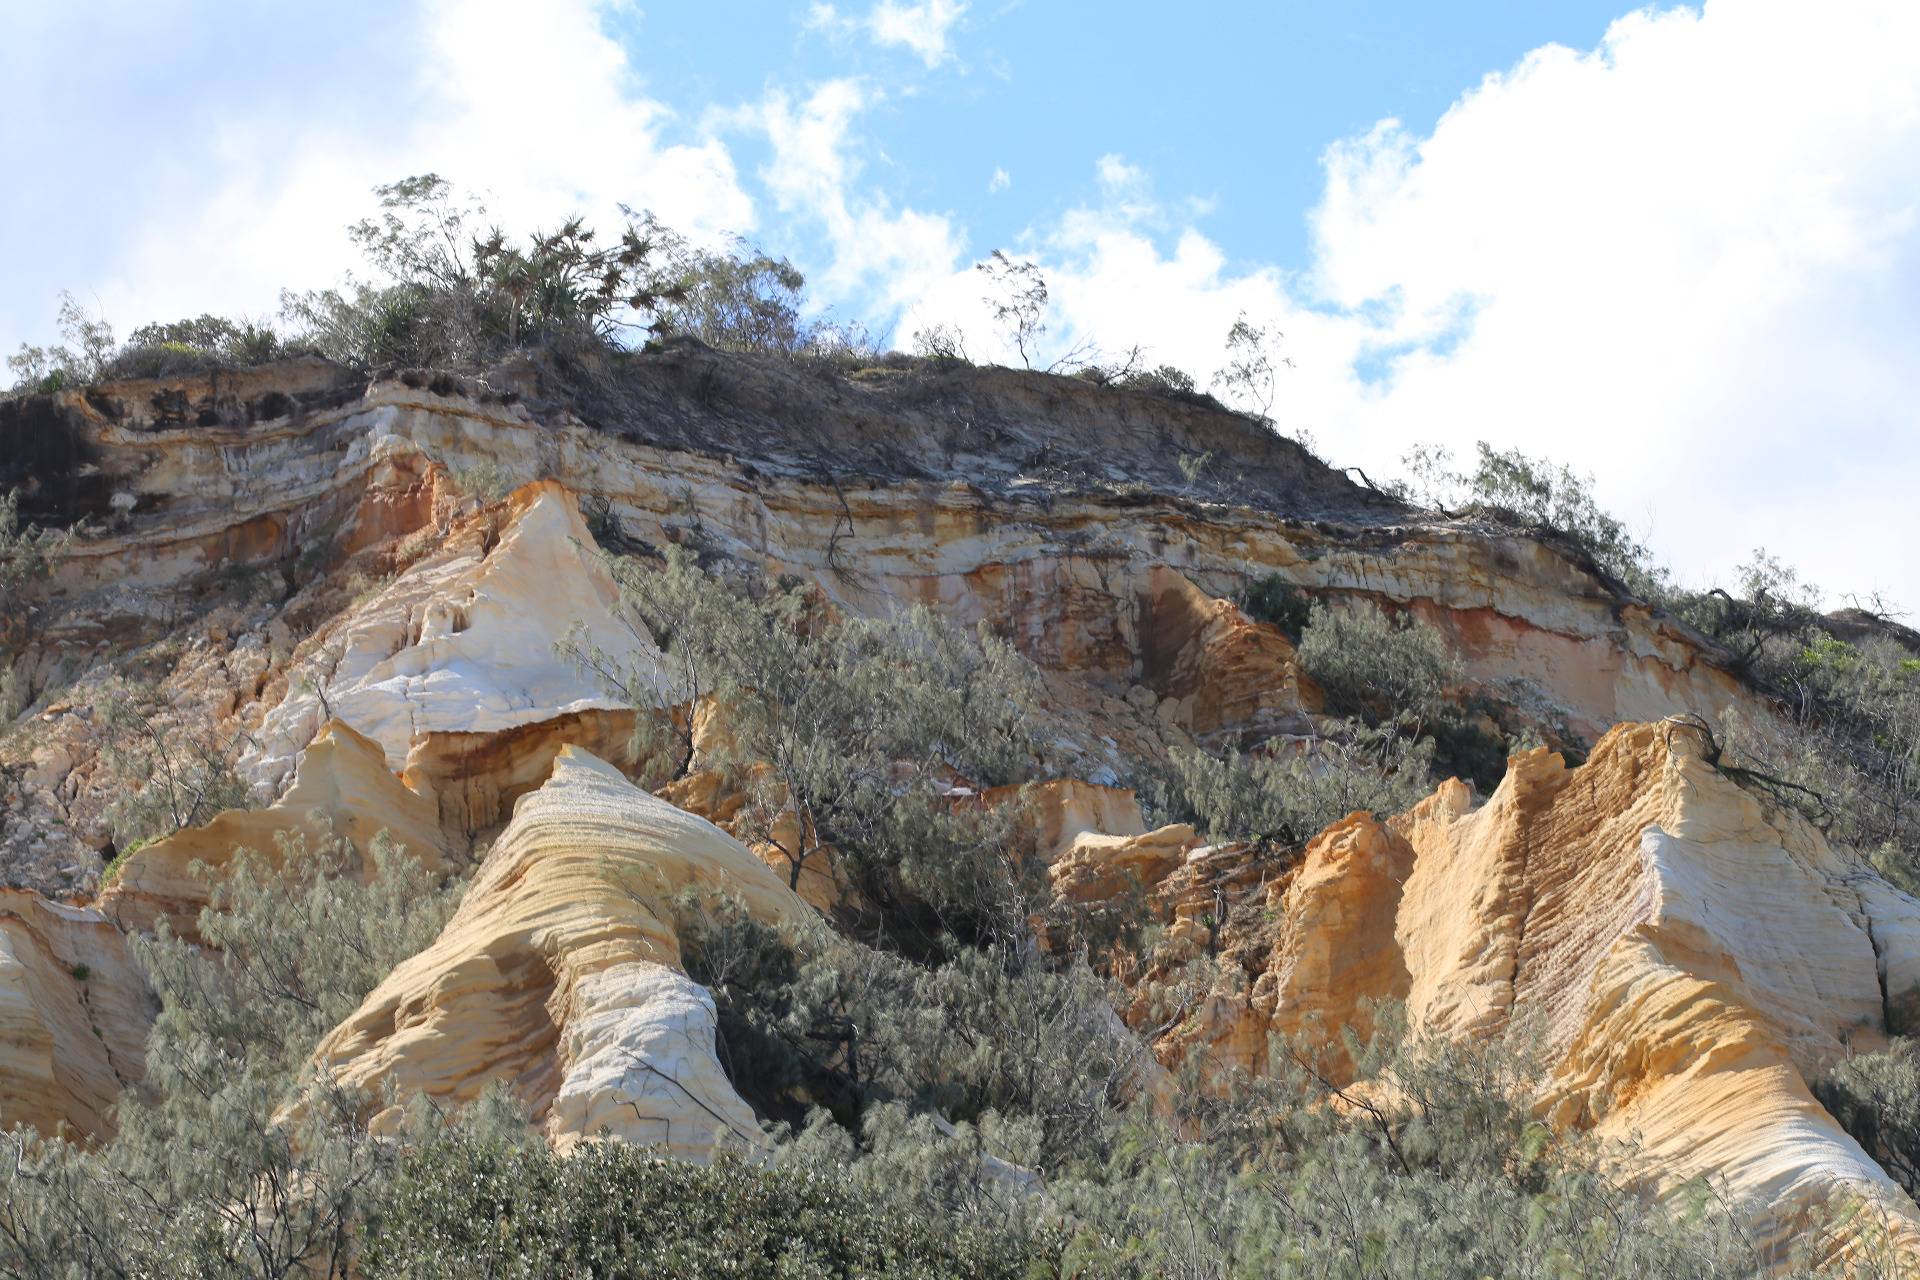 Sandstone formation "The Cathedrals"